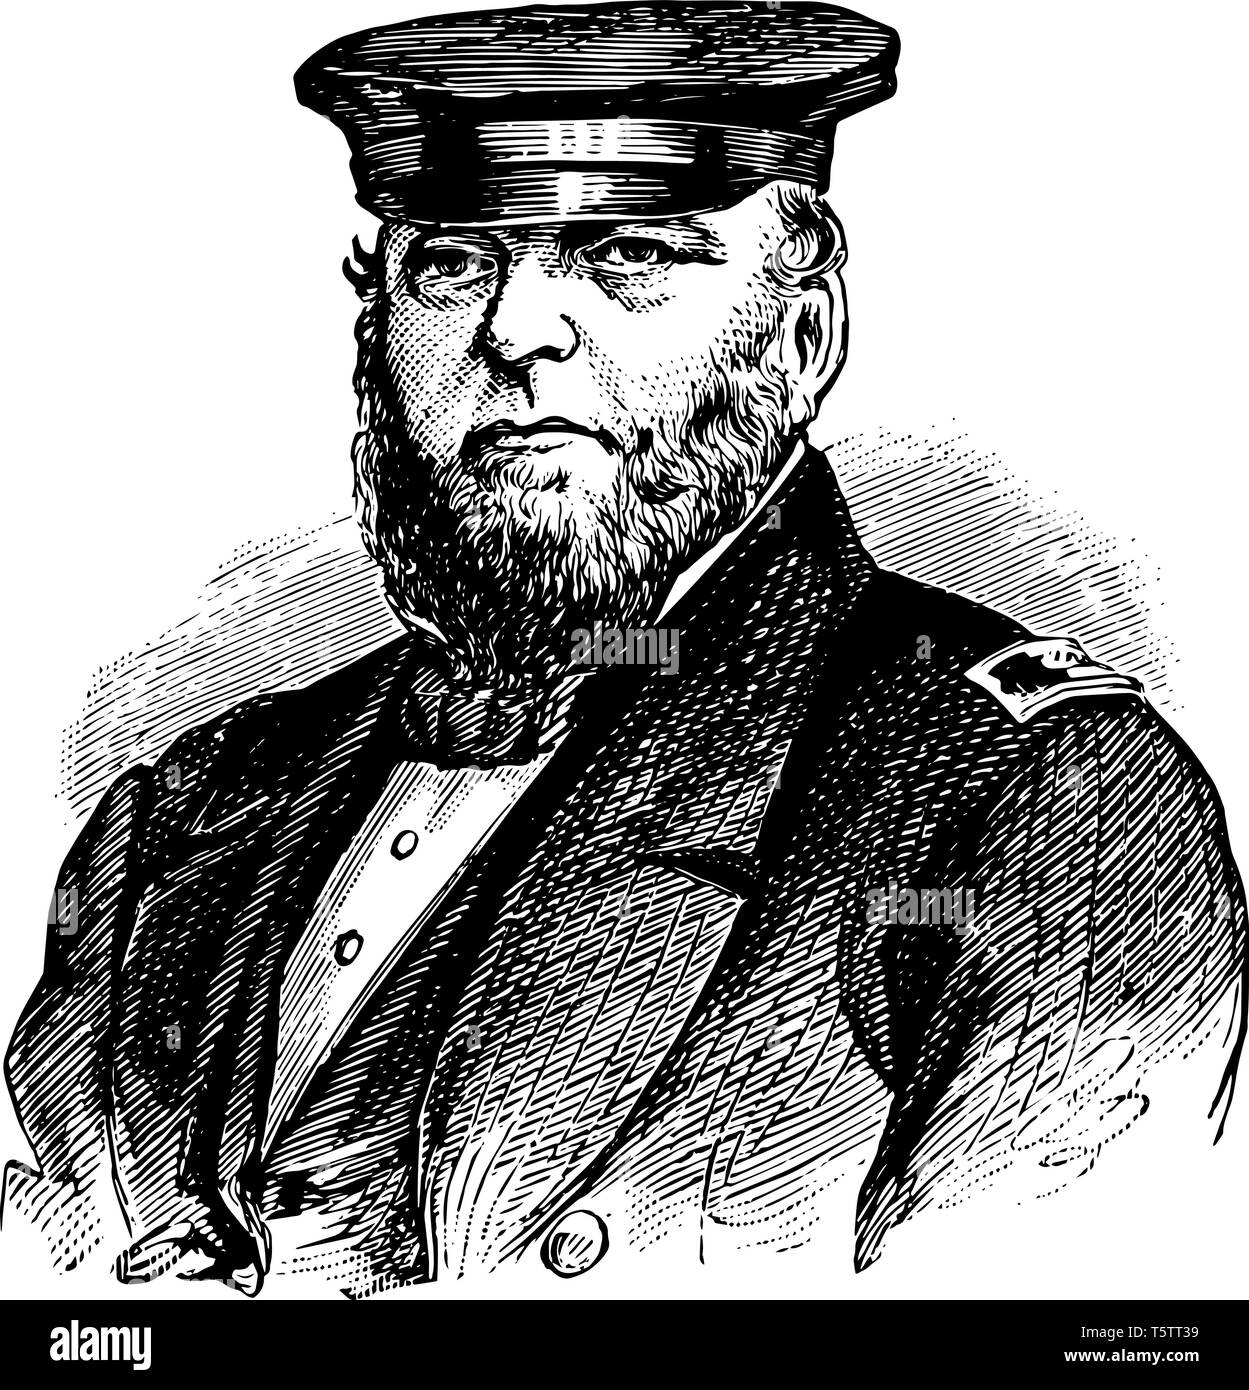 Louis Malesherbes Goldborough 1805 to 1877 he was a rear admiral in the United States navy during the American civil war vintage line drawing or engra Stock Vector